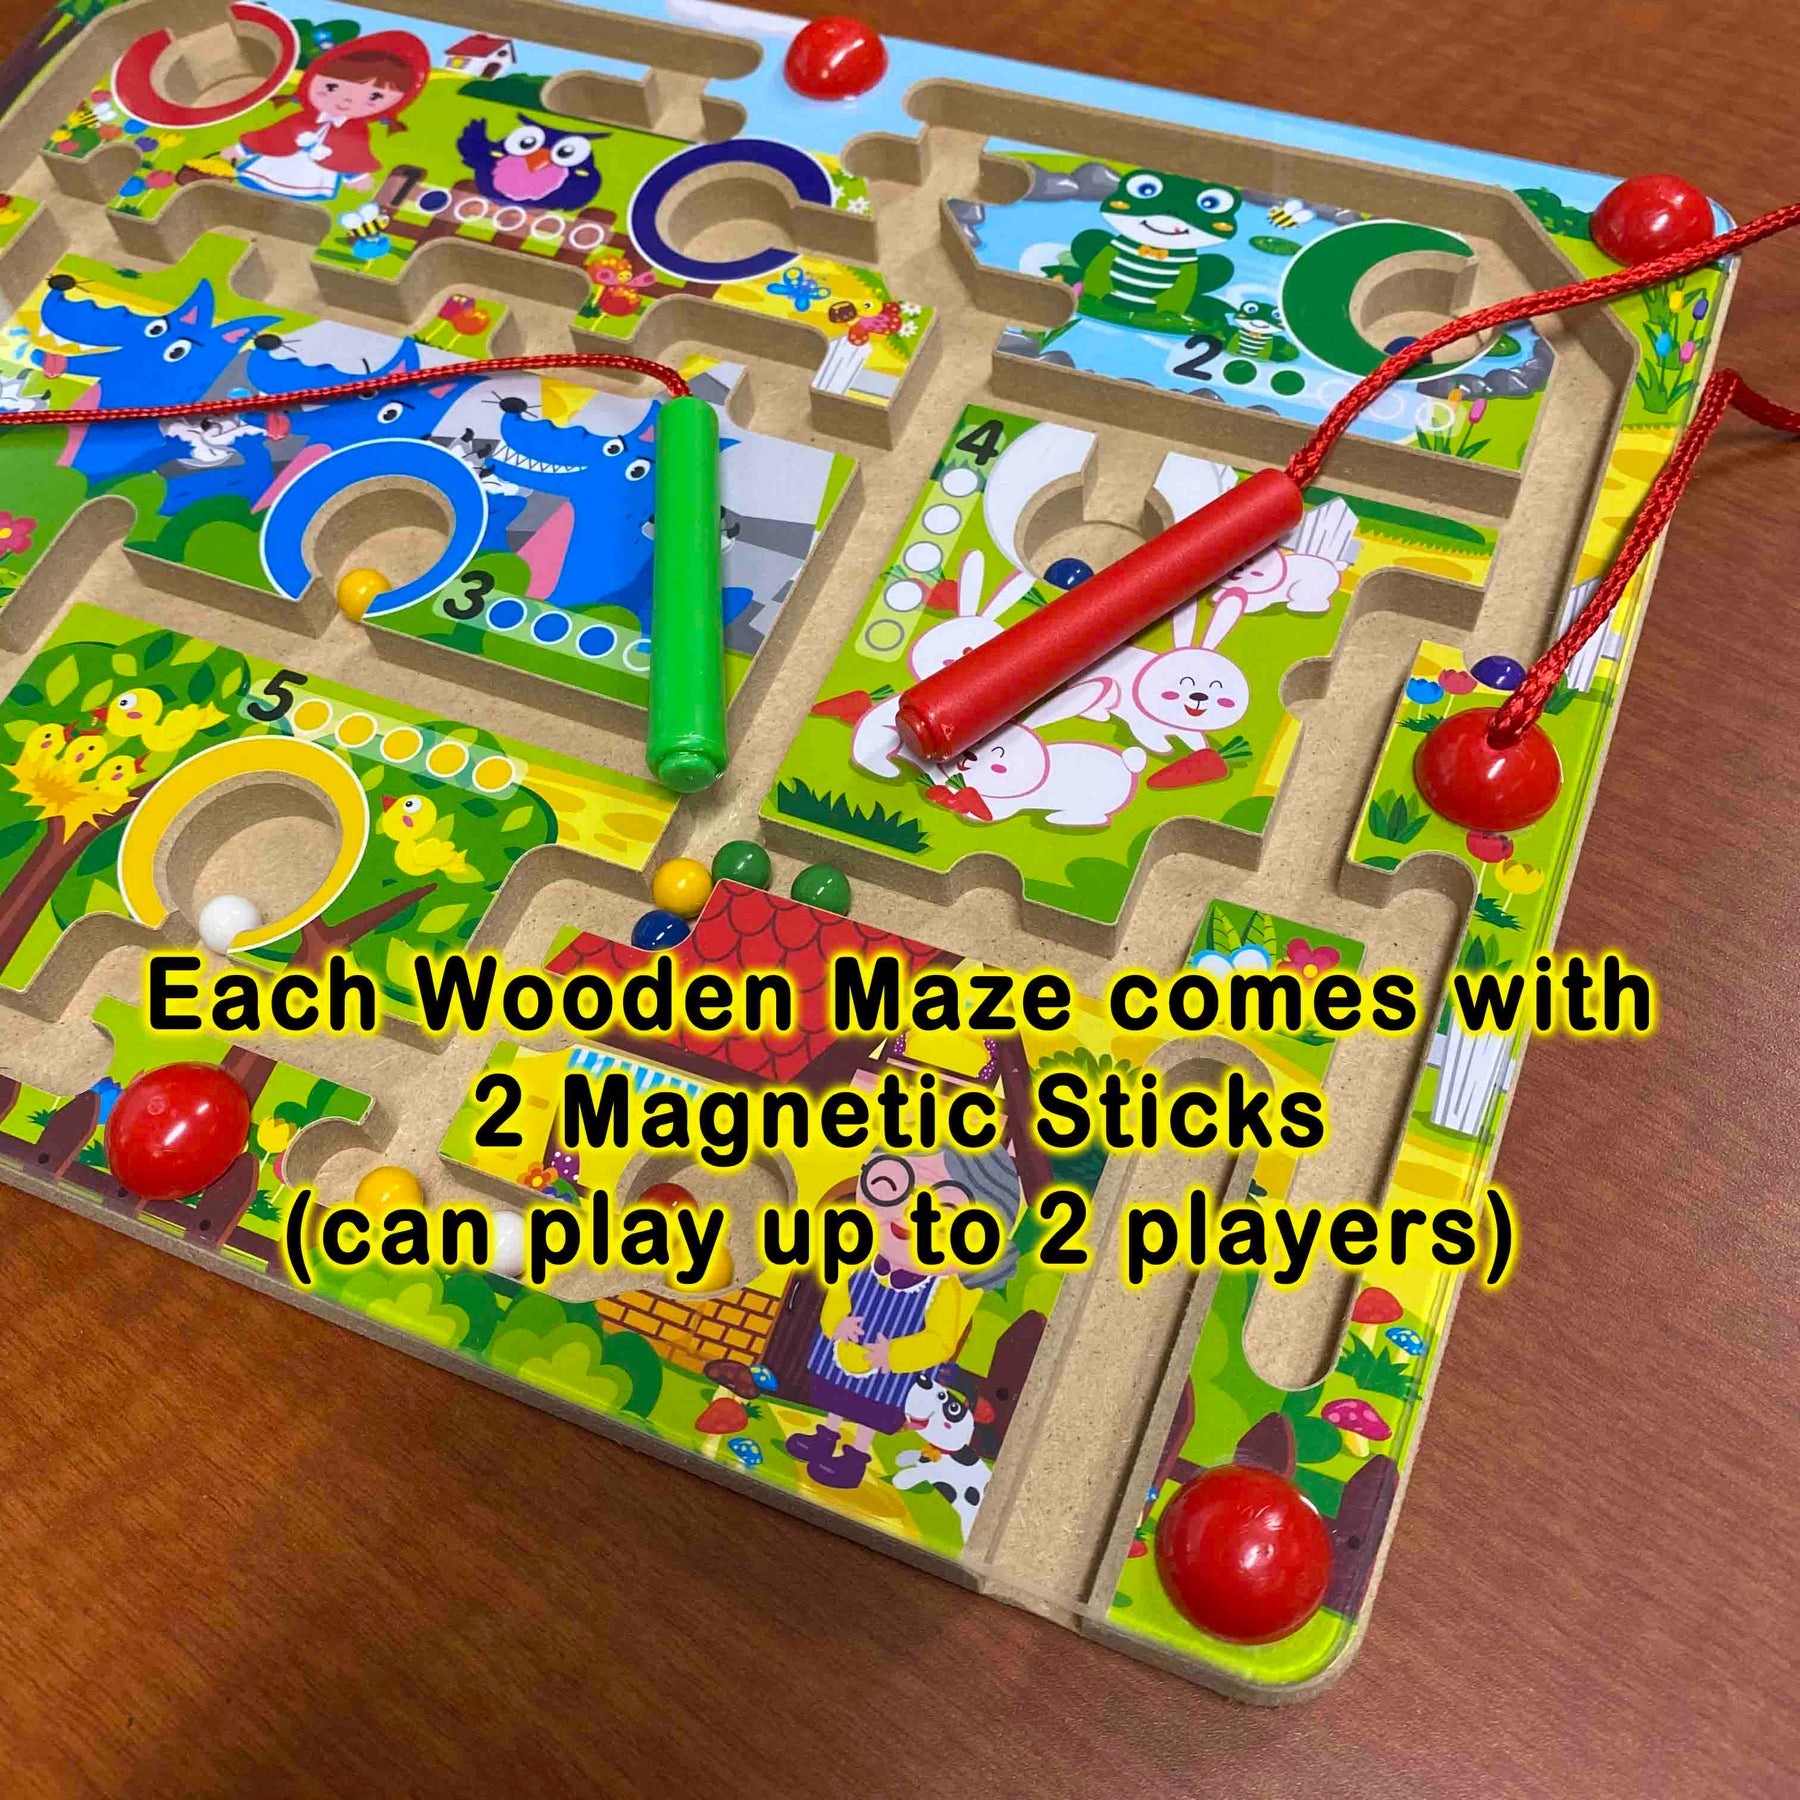 Magnetic Wooden Maze Toy for Children Age 3 and above - The Ugly Duckling | Early Child Development Games Great Gift Ideas for Kids